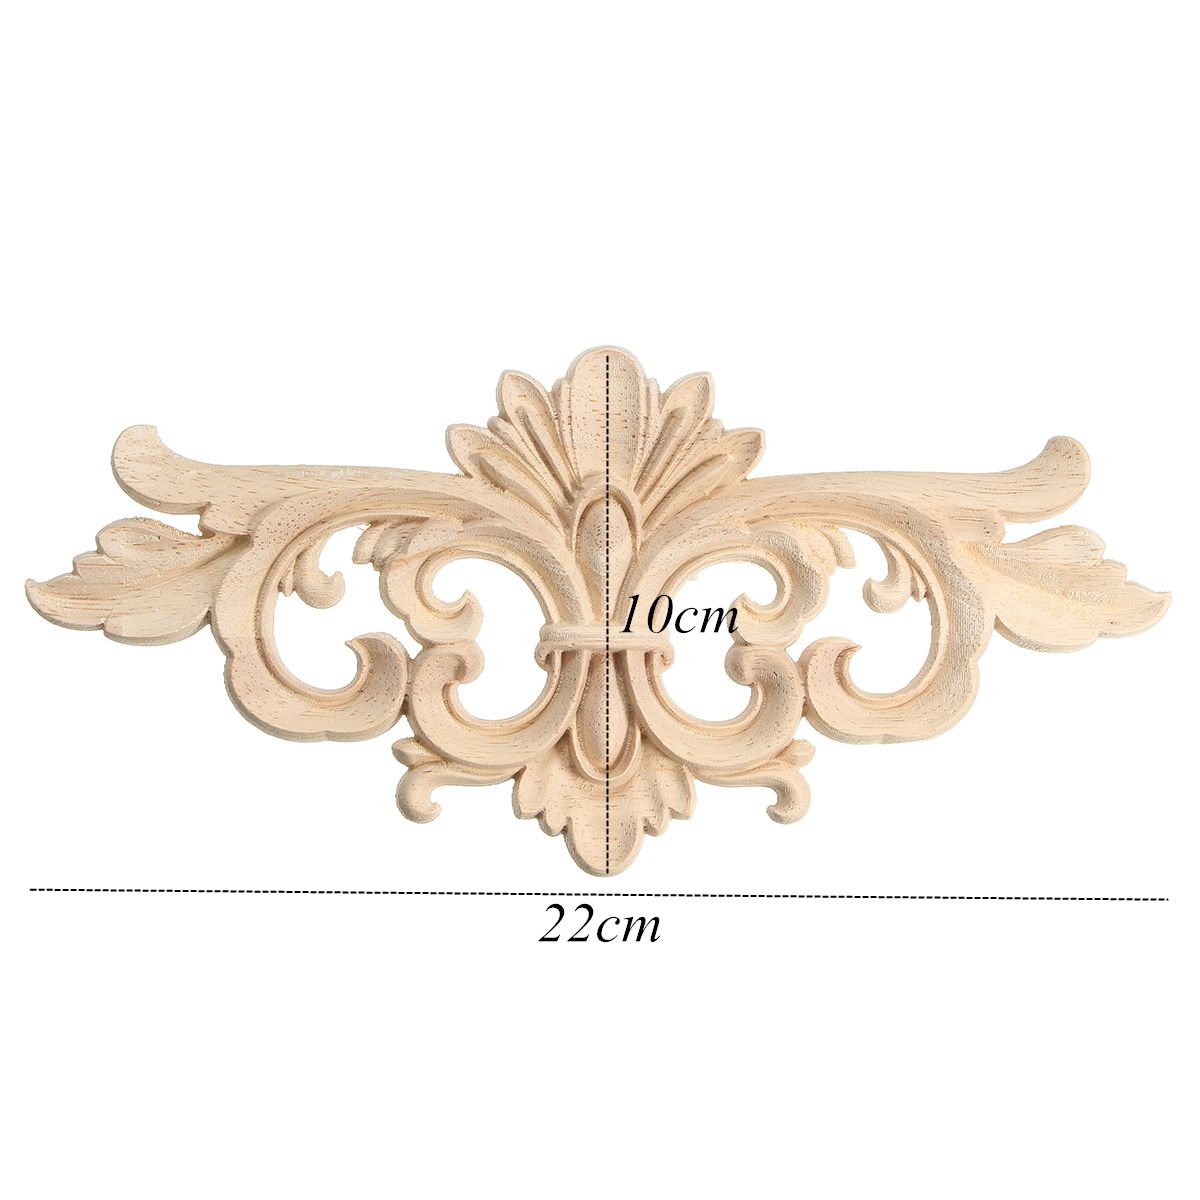 Wood-Carving-Applique-Unpainted-Flower-Applique-Wood-Carving-Decal-for-Furniture-Cabinet-22x10cm-1162699